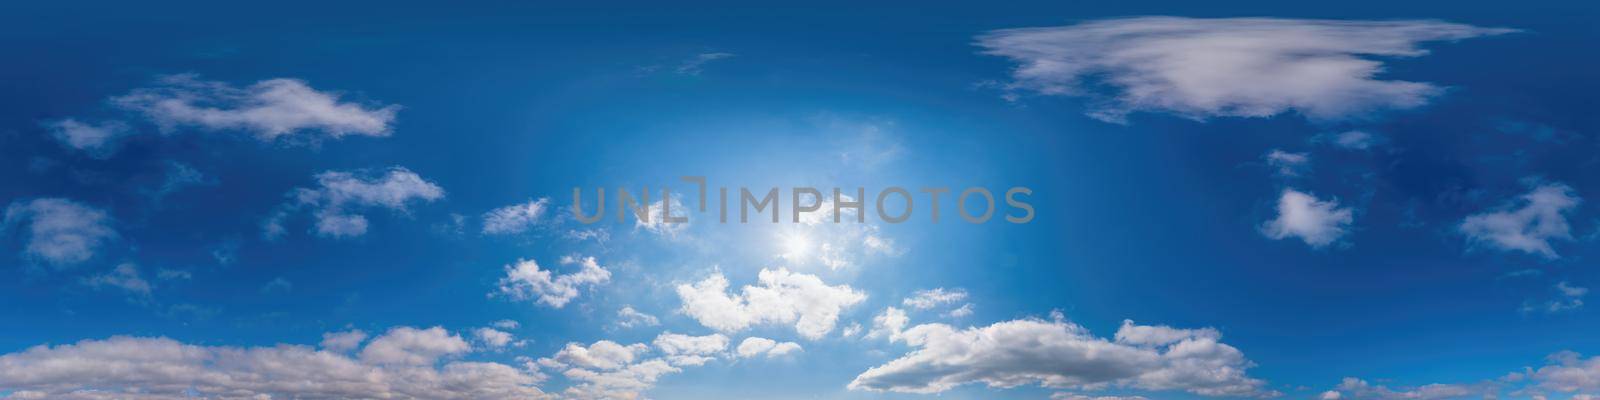 Blue sky panorama with Cirrus clouds in Seamless spherical equirectangular format. Full zenith for use in 3D graphics, game and editing aerial drone 360 degree panoramas for sky replacement. by Matiunina